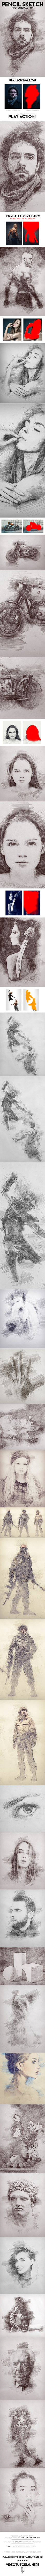 Pencil Sketch Photoshop Action - Photo Effects Actions